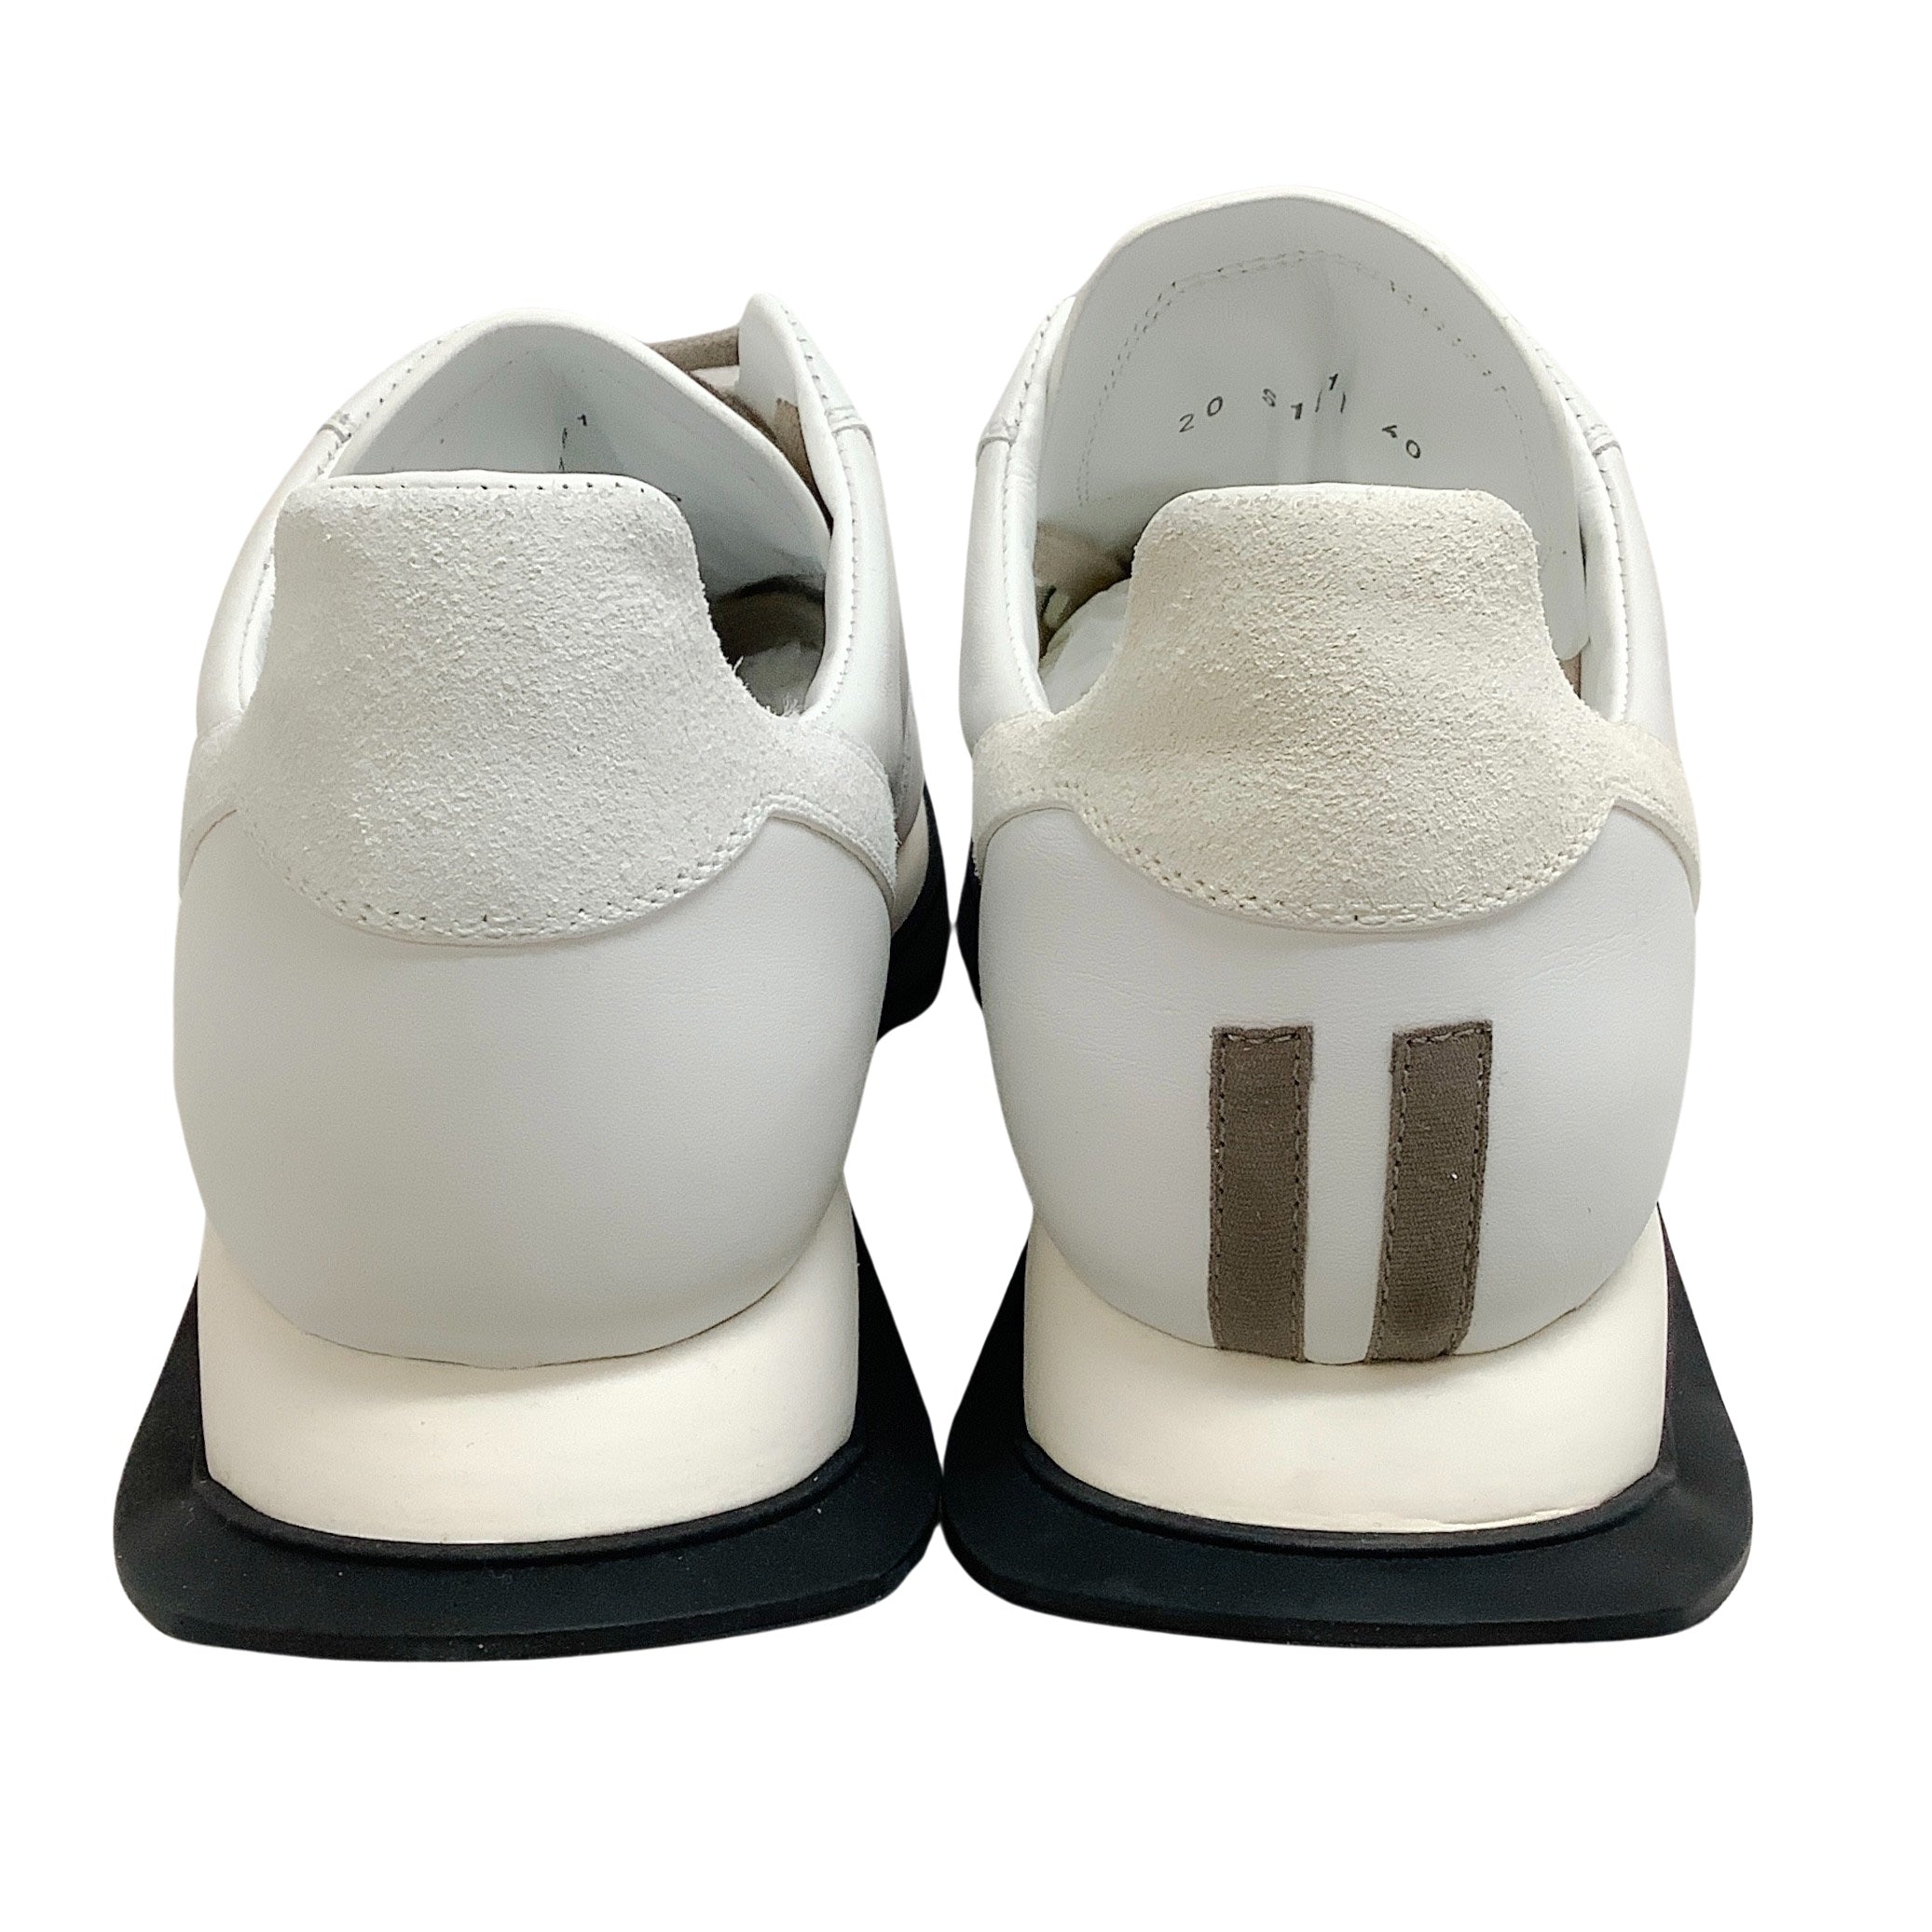 Rick Owens Chalk White Runner Lace Up Sneakers